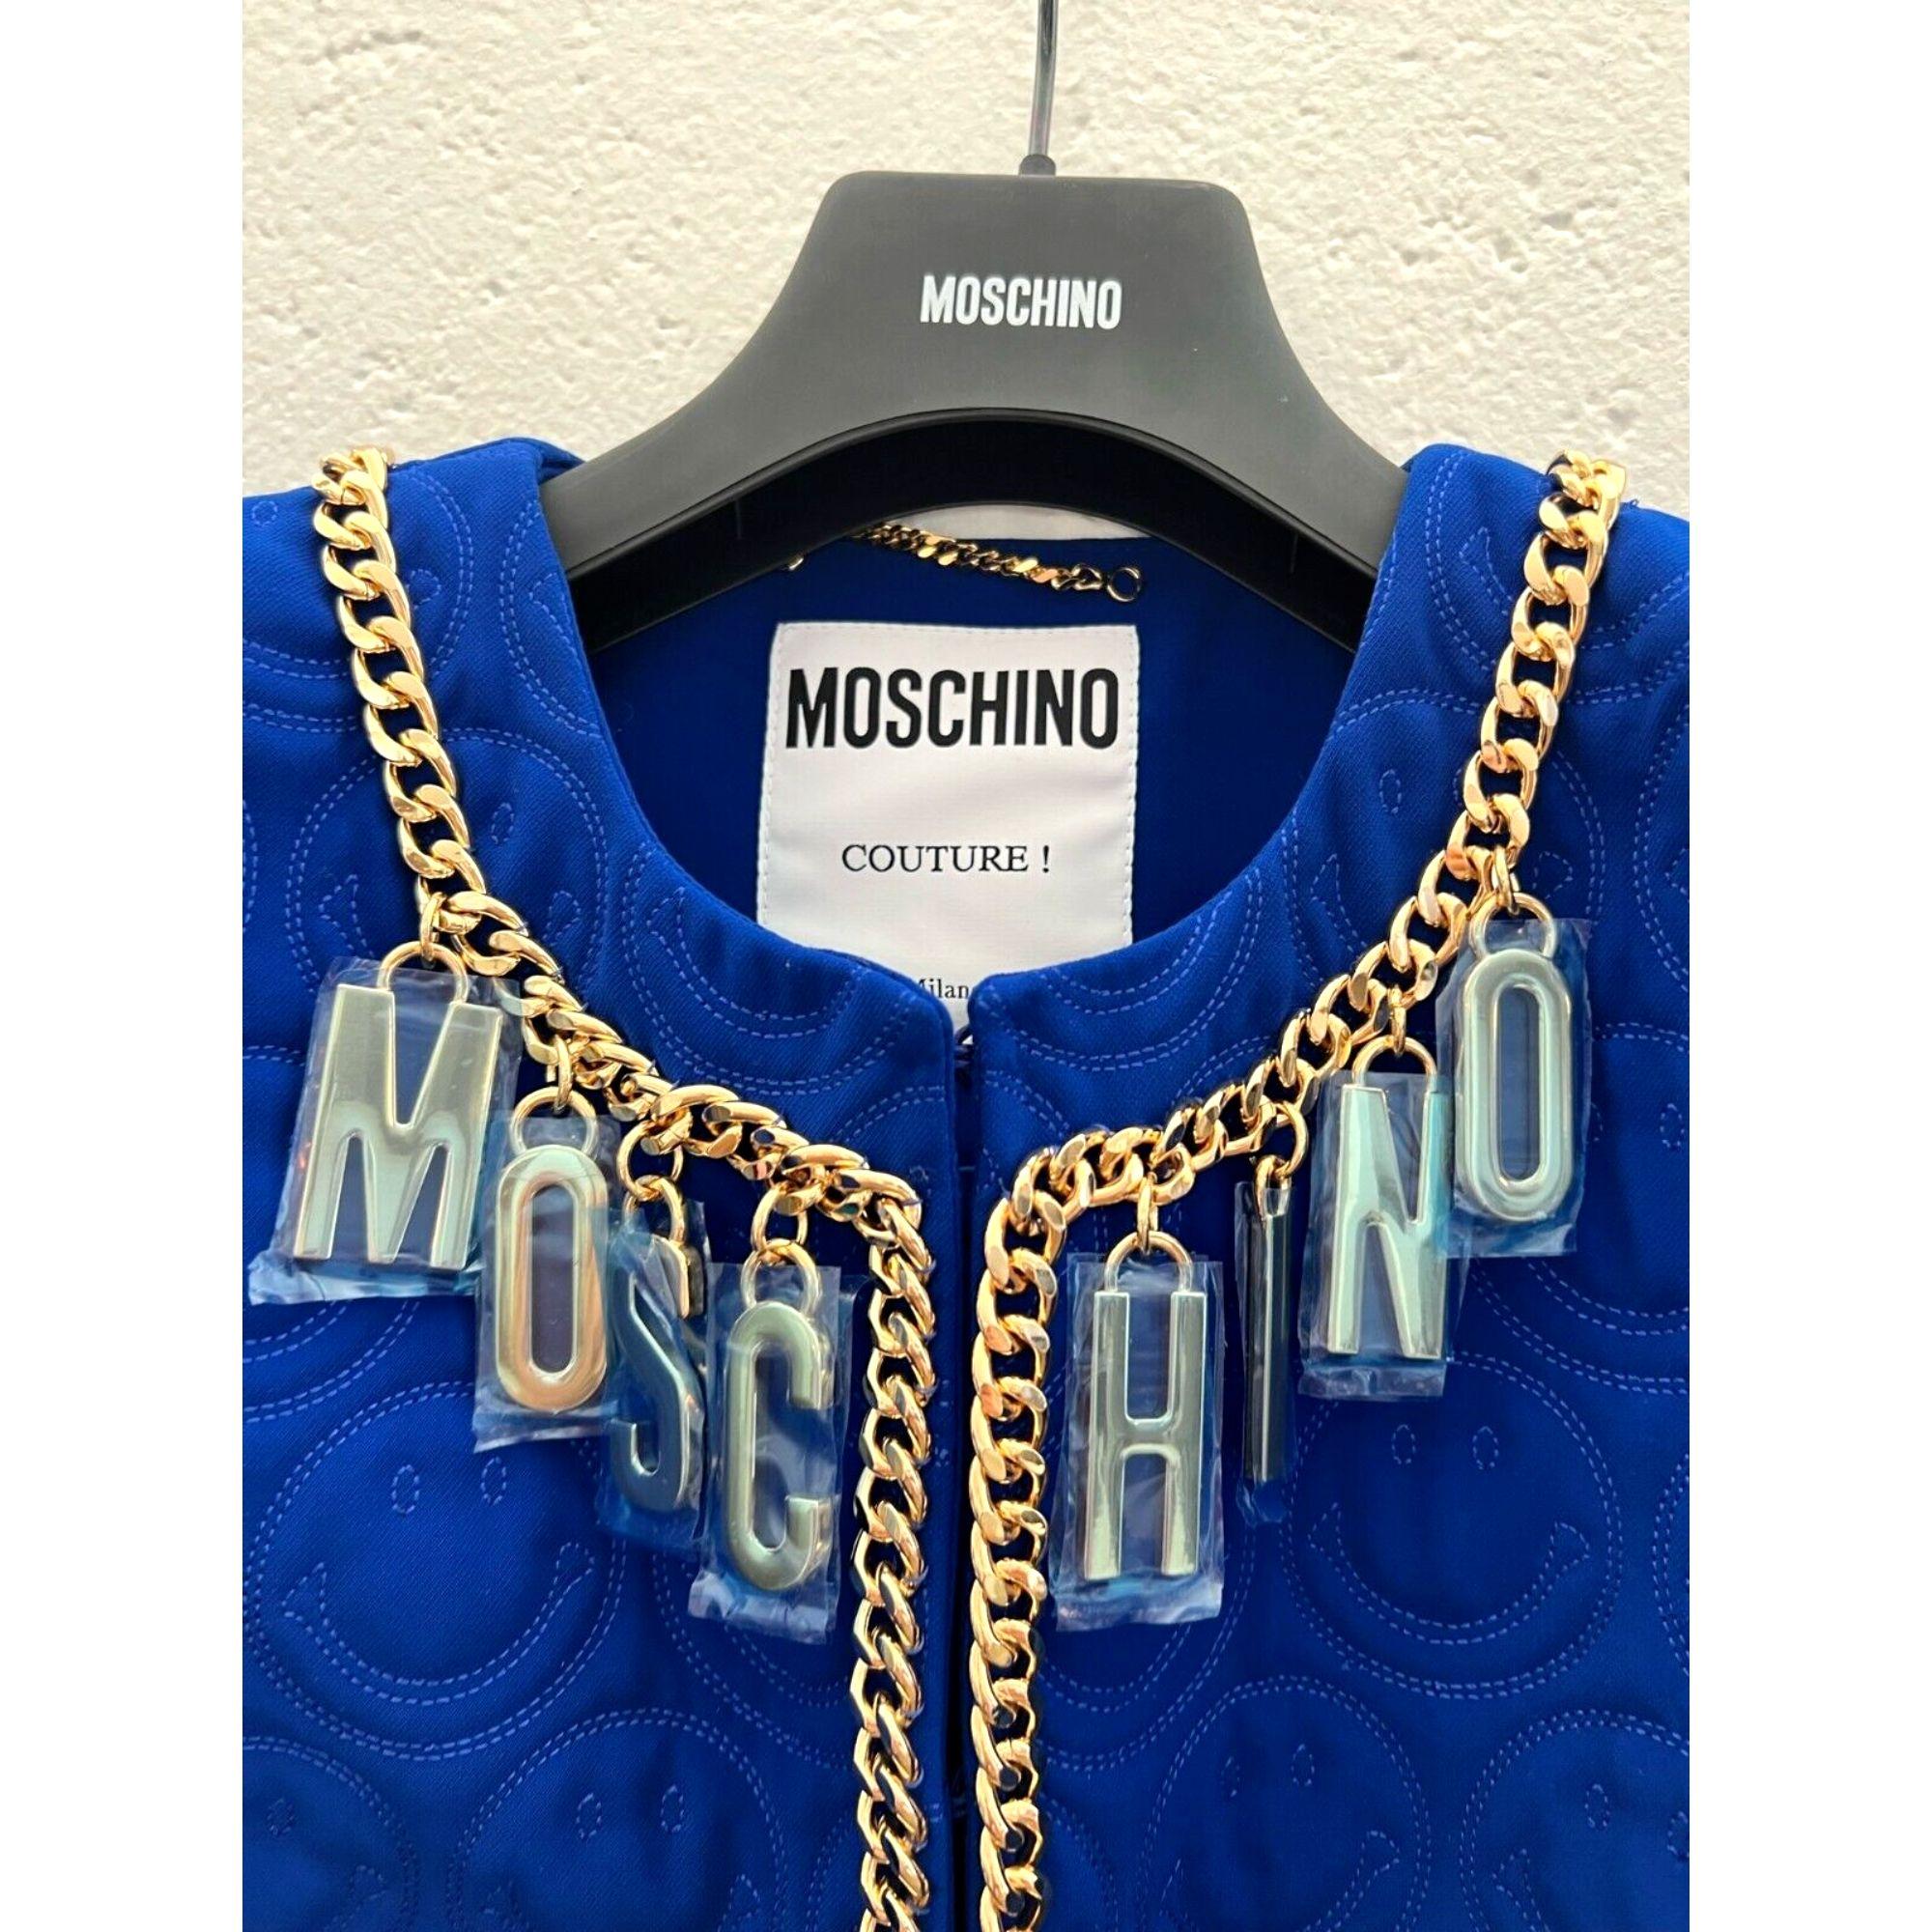 SS21 Moschino Couture Jeremy Scott BlueBlazer AllOver Stitched Smiley Face

Additional Information:
Material: 94% CU Rayon, 6% EA
Color: Blue
Size: IT 44 / US 10
Pattern: Allover, Smiley Face
Style: Blazer
Dimensions: Shoulder to shoulder 16.5